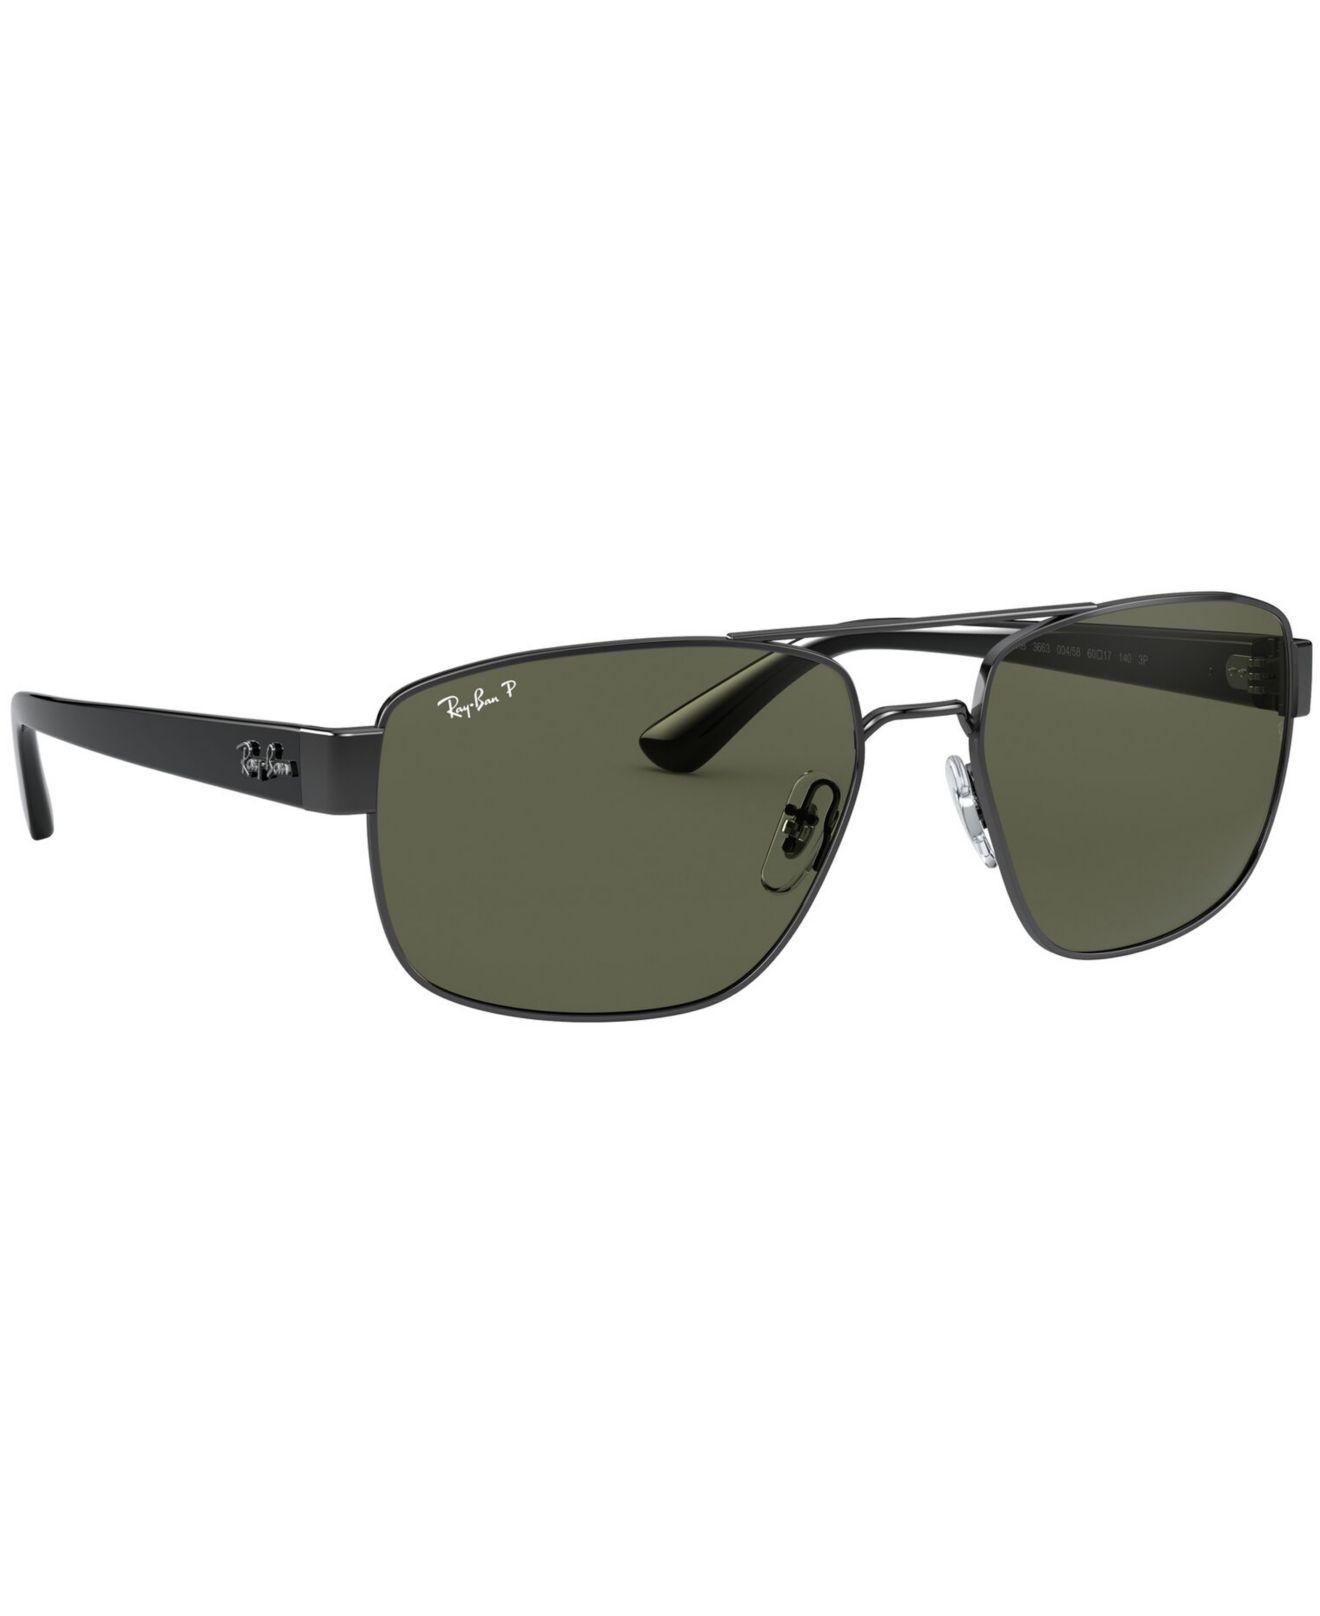 Ray Ban Polarized Sunglasses Rb P In Green For Men Lyst